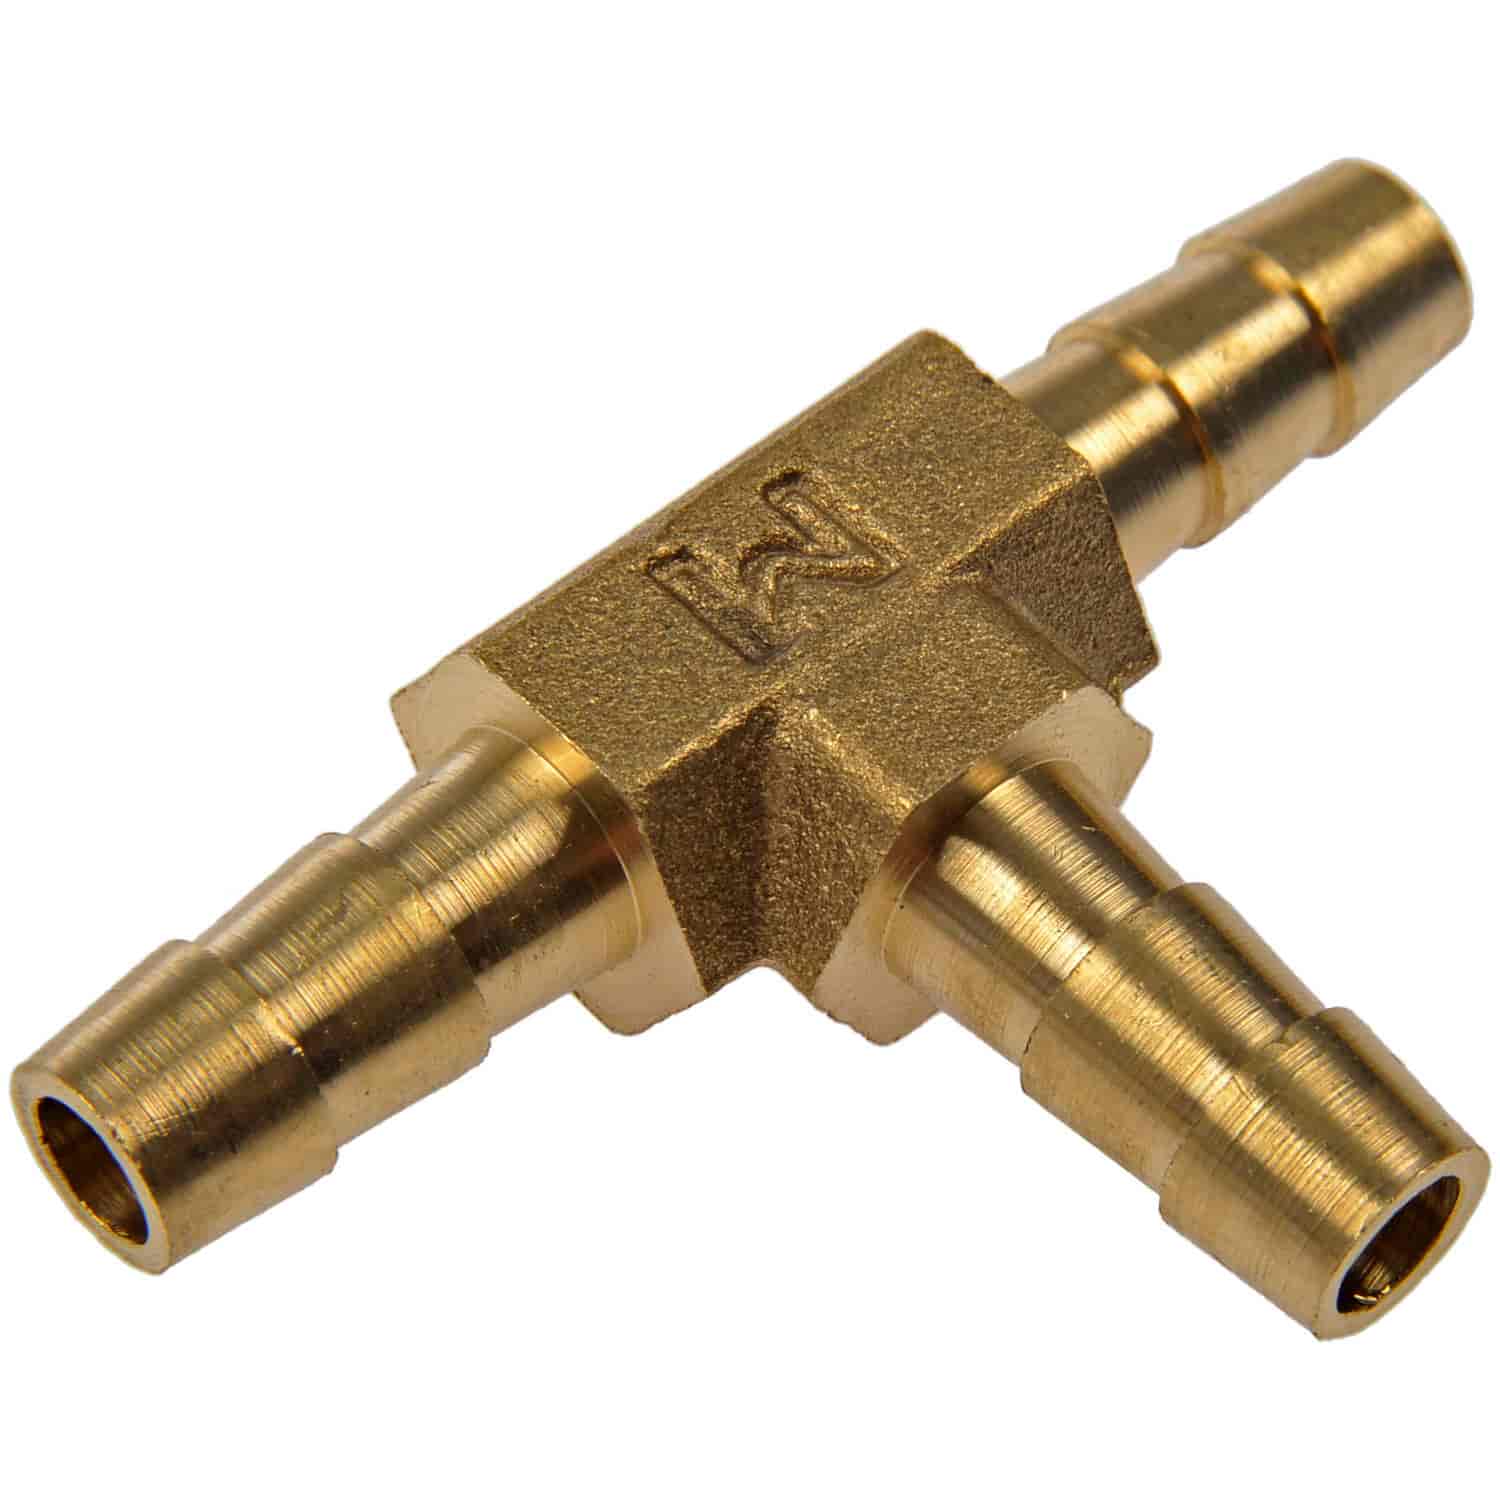 Brass Fuel Hose Tee Connector 1/4 In.